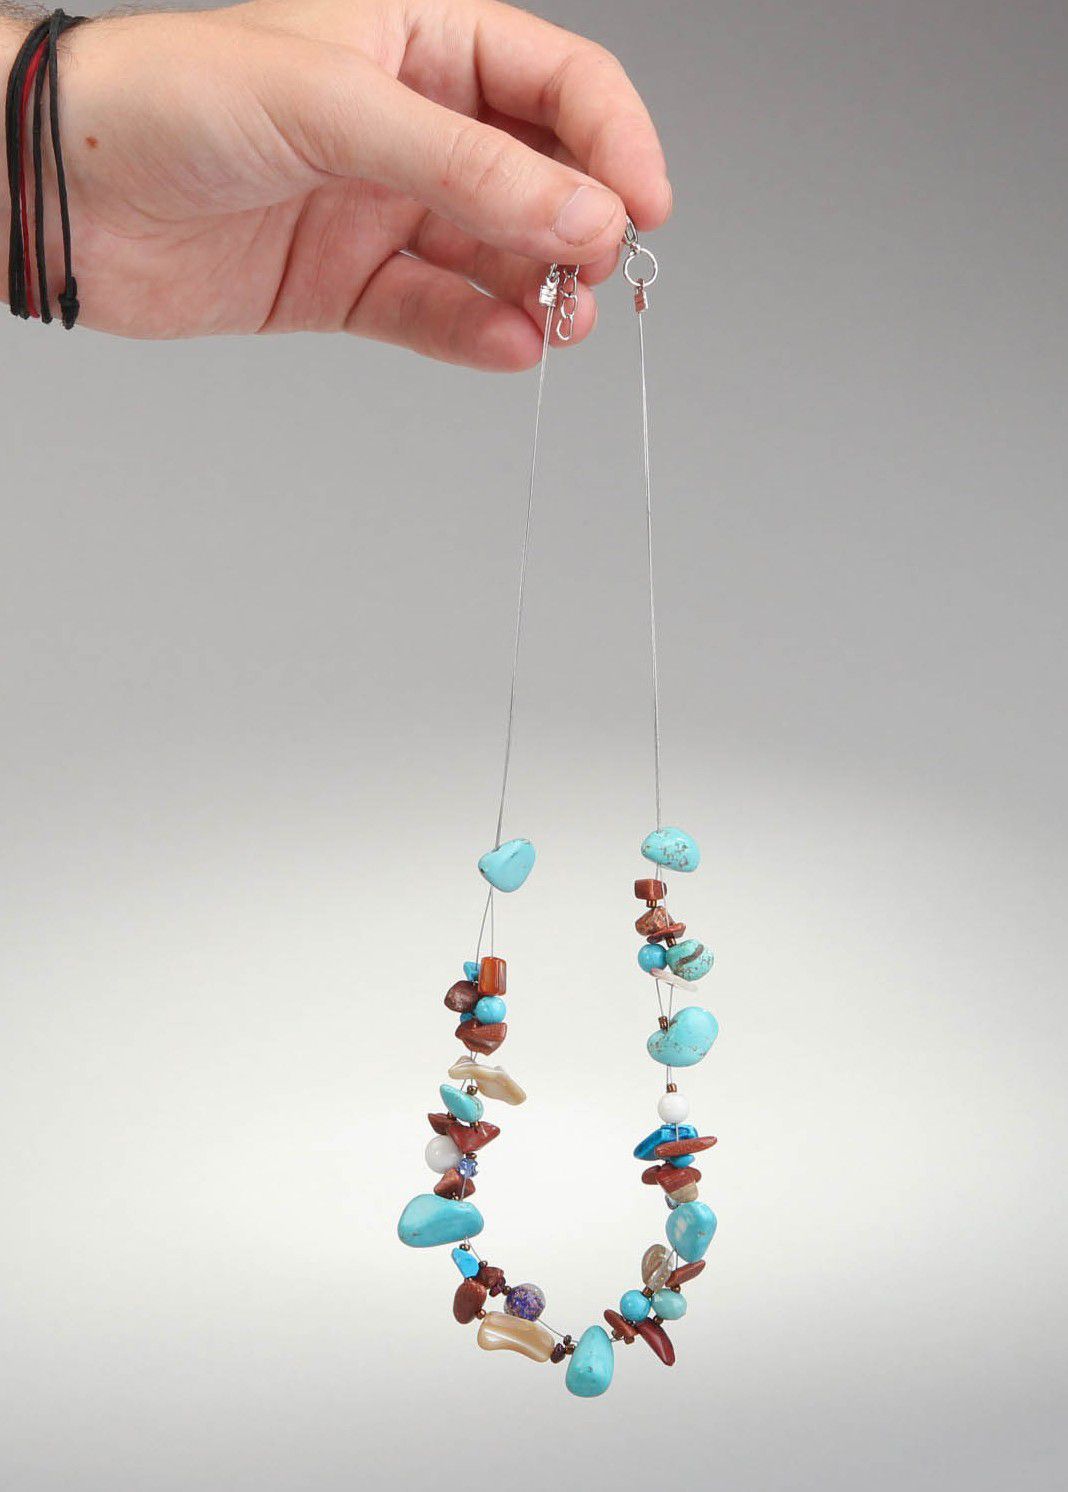 Necklace made of colorful natural stones photo 4